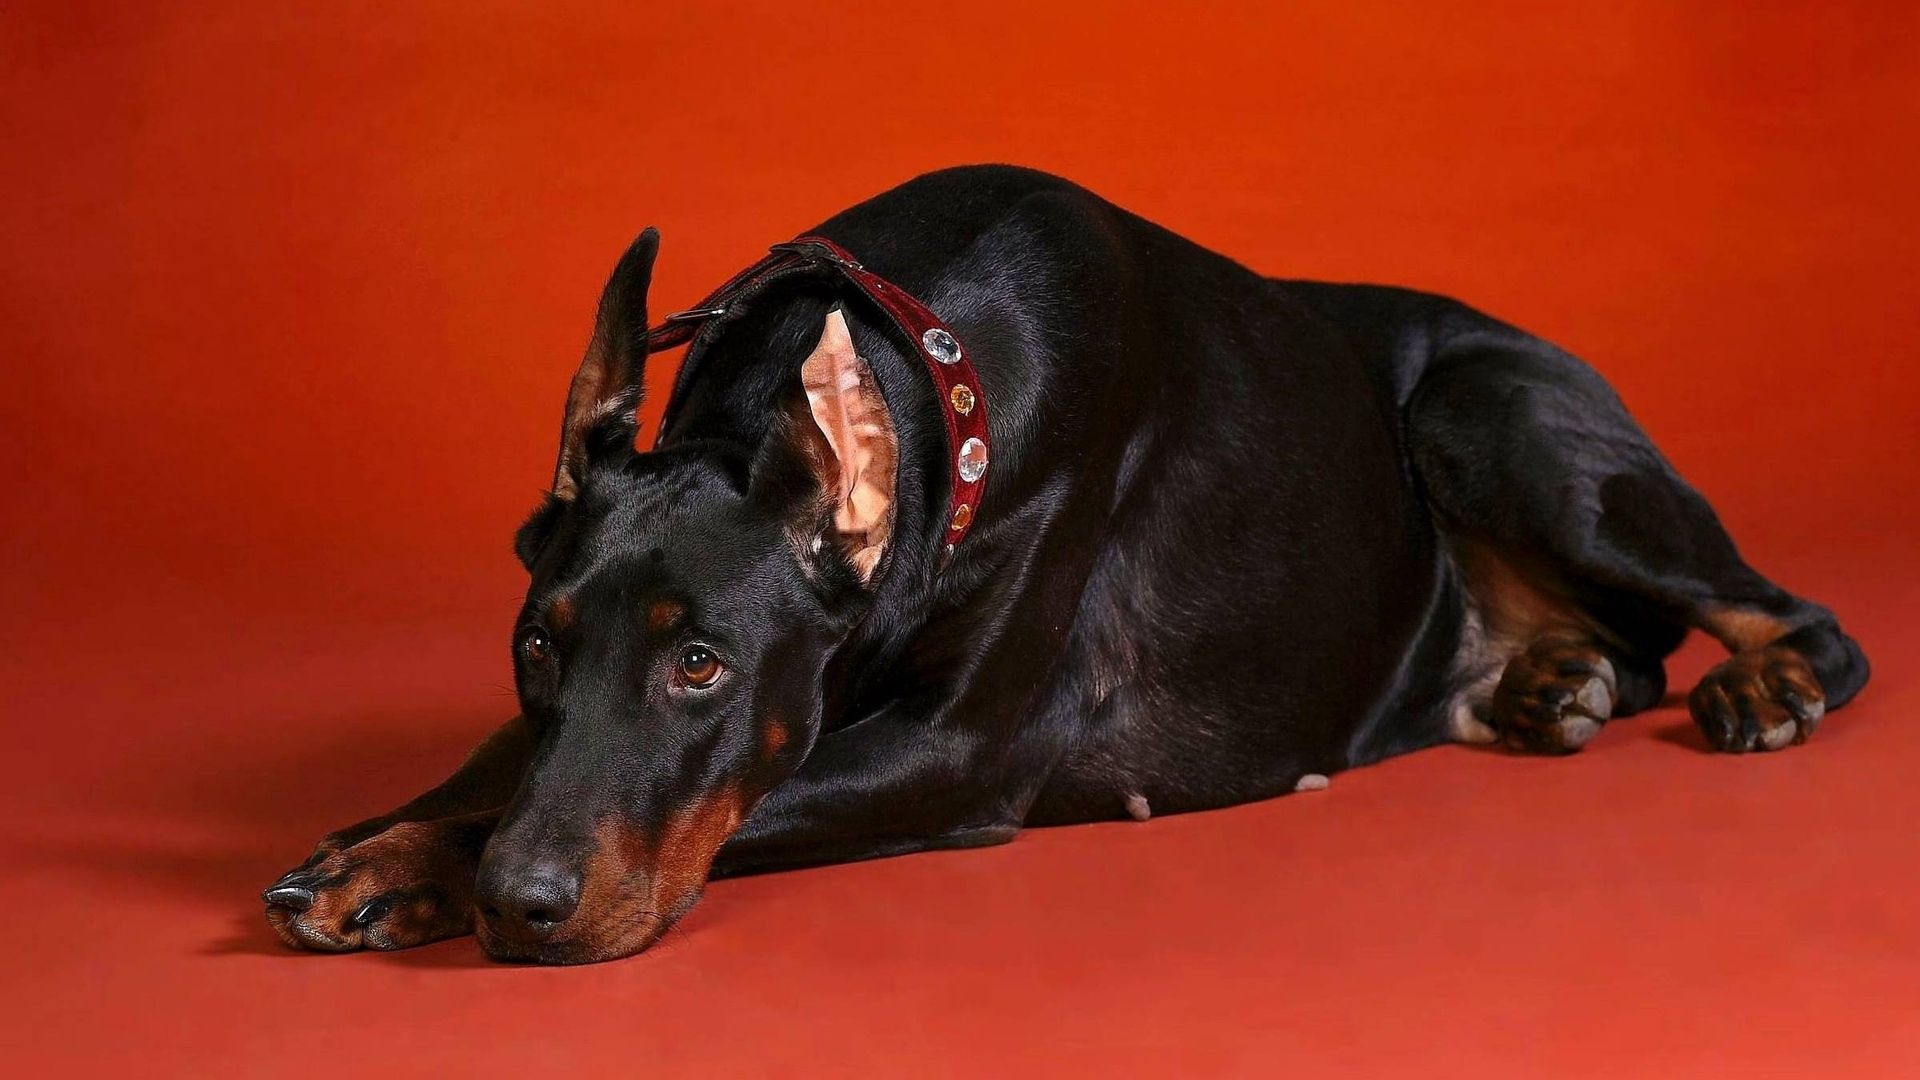 wallpapers animals, to lie down, lie, dog, large, big, doberman, photosession, photo shoot